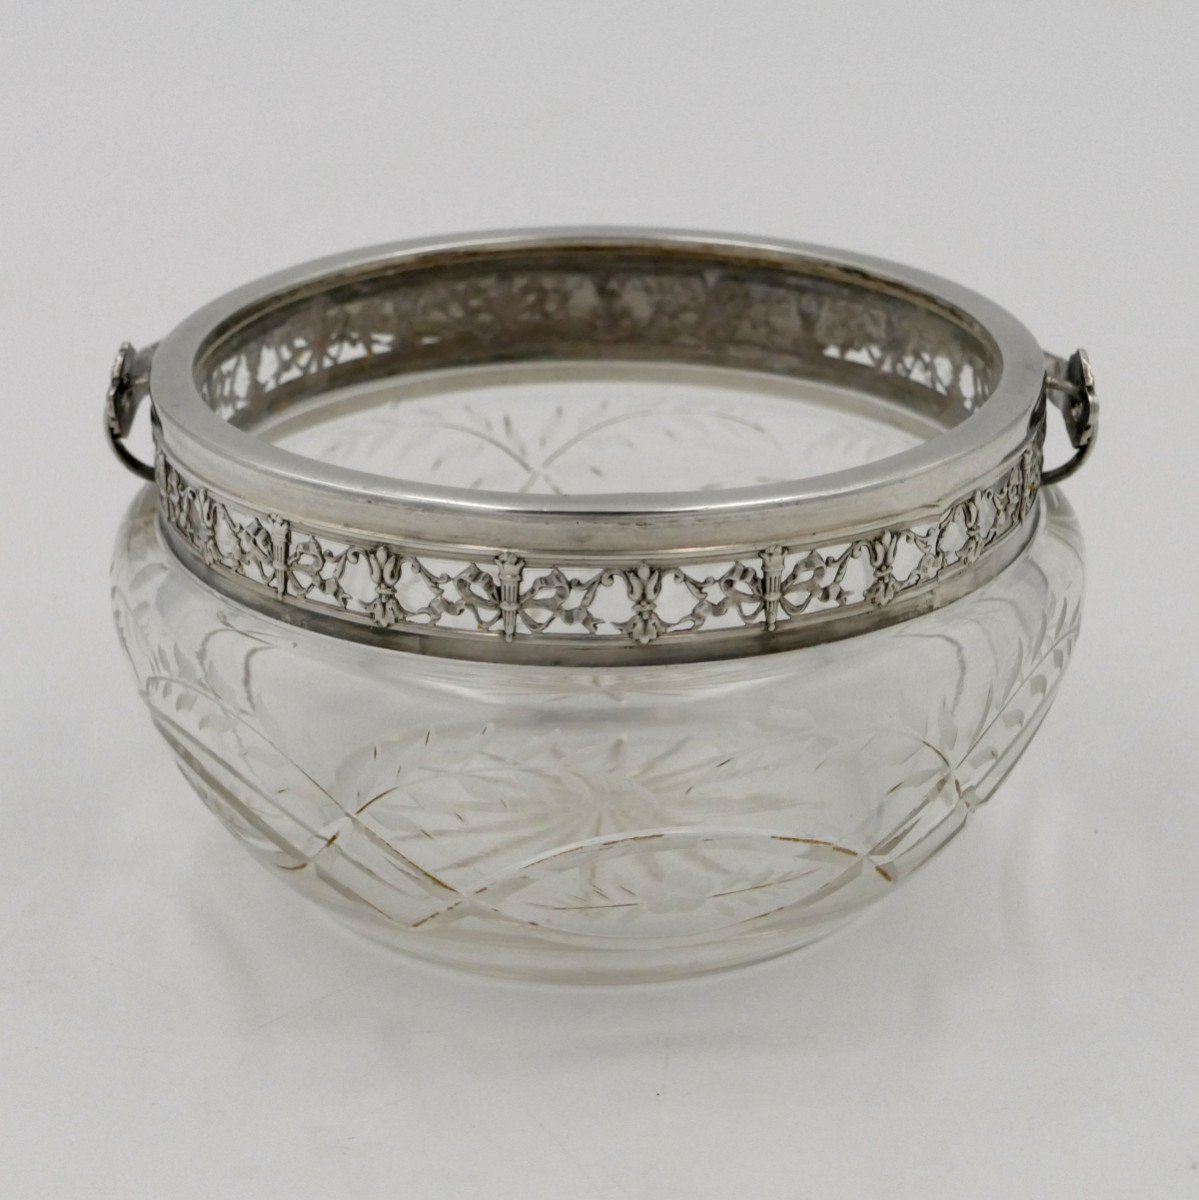 Small Cup Or Bezel In Engraved Crystal, Sterling Silver Mount, Minerva.-photo-1